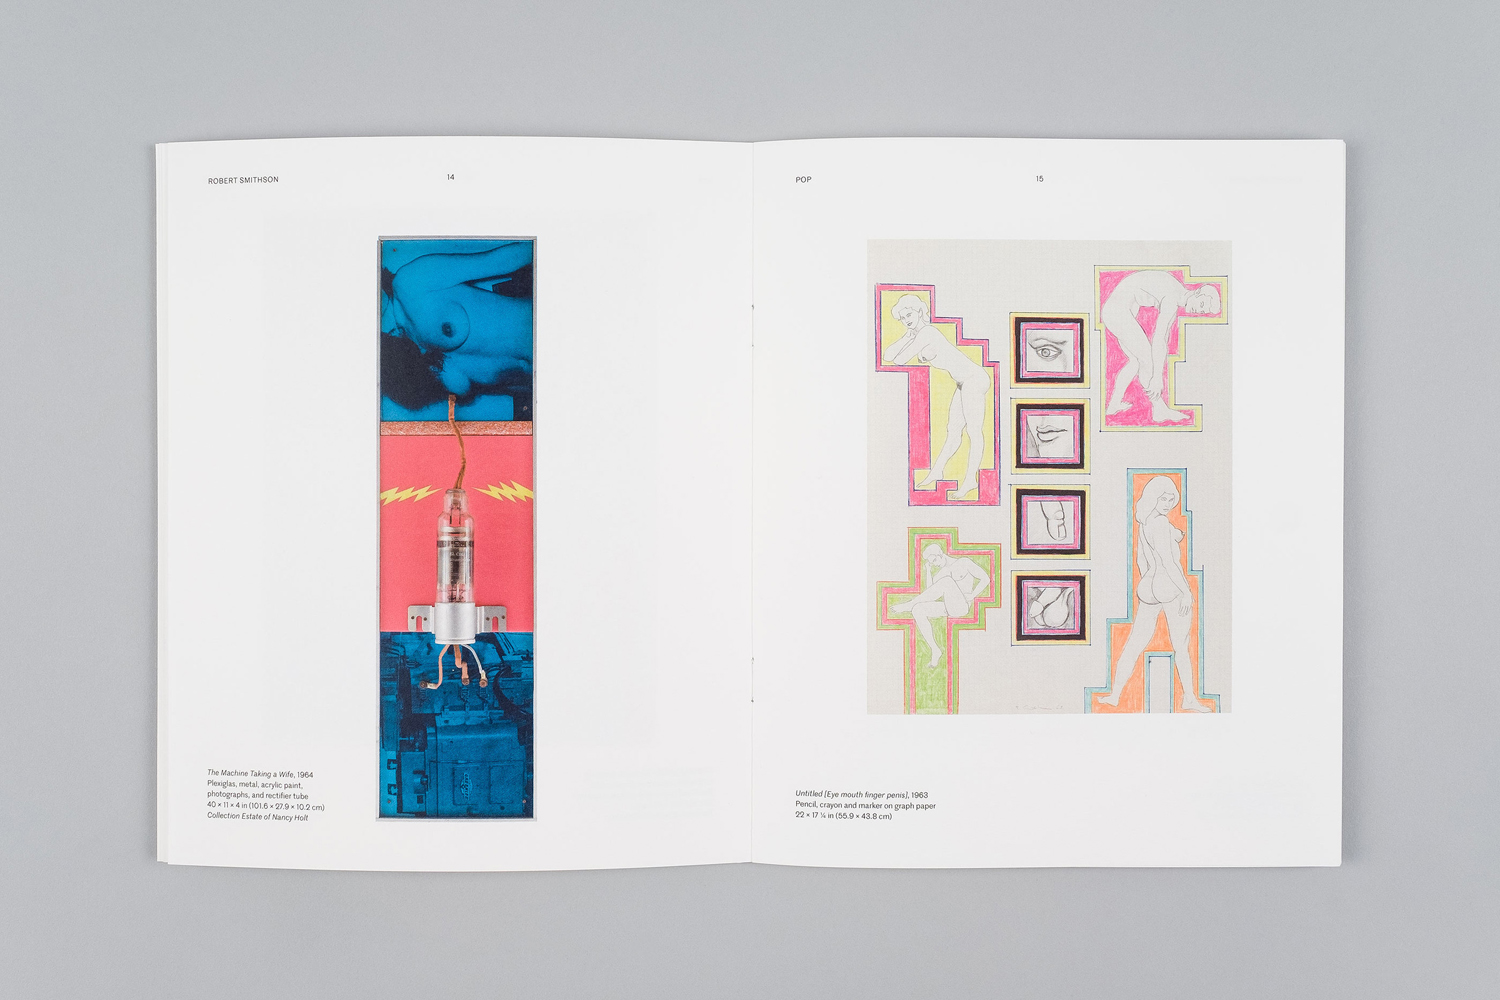 Brand identity and exhibition guide for New York contemporary art gallery James Cohan by graphic design studio Project Projects